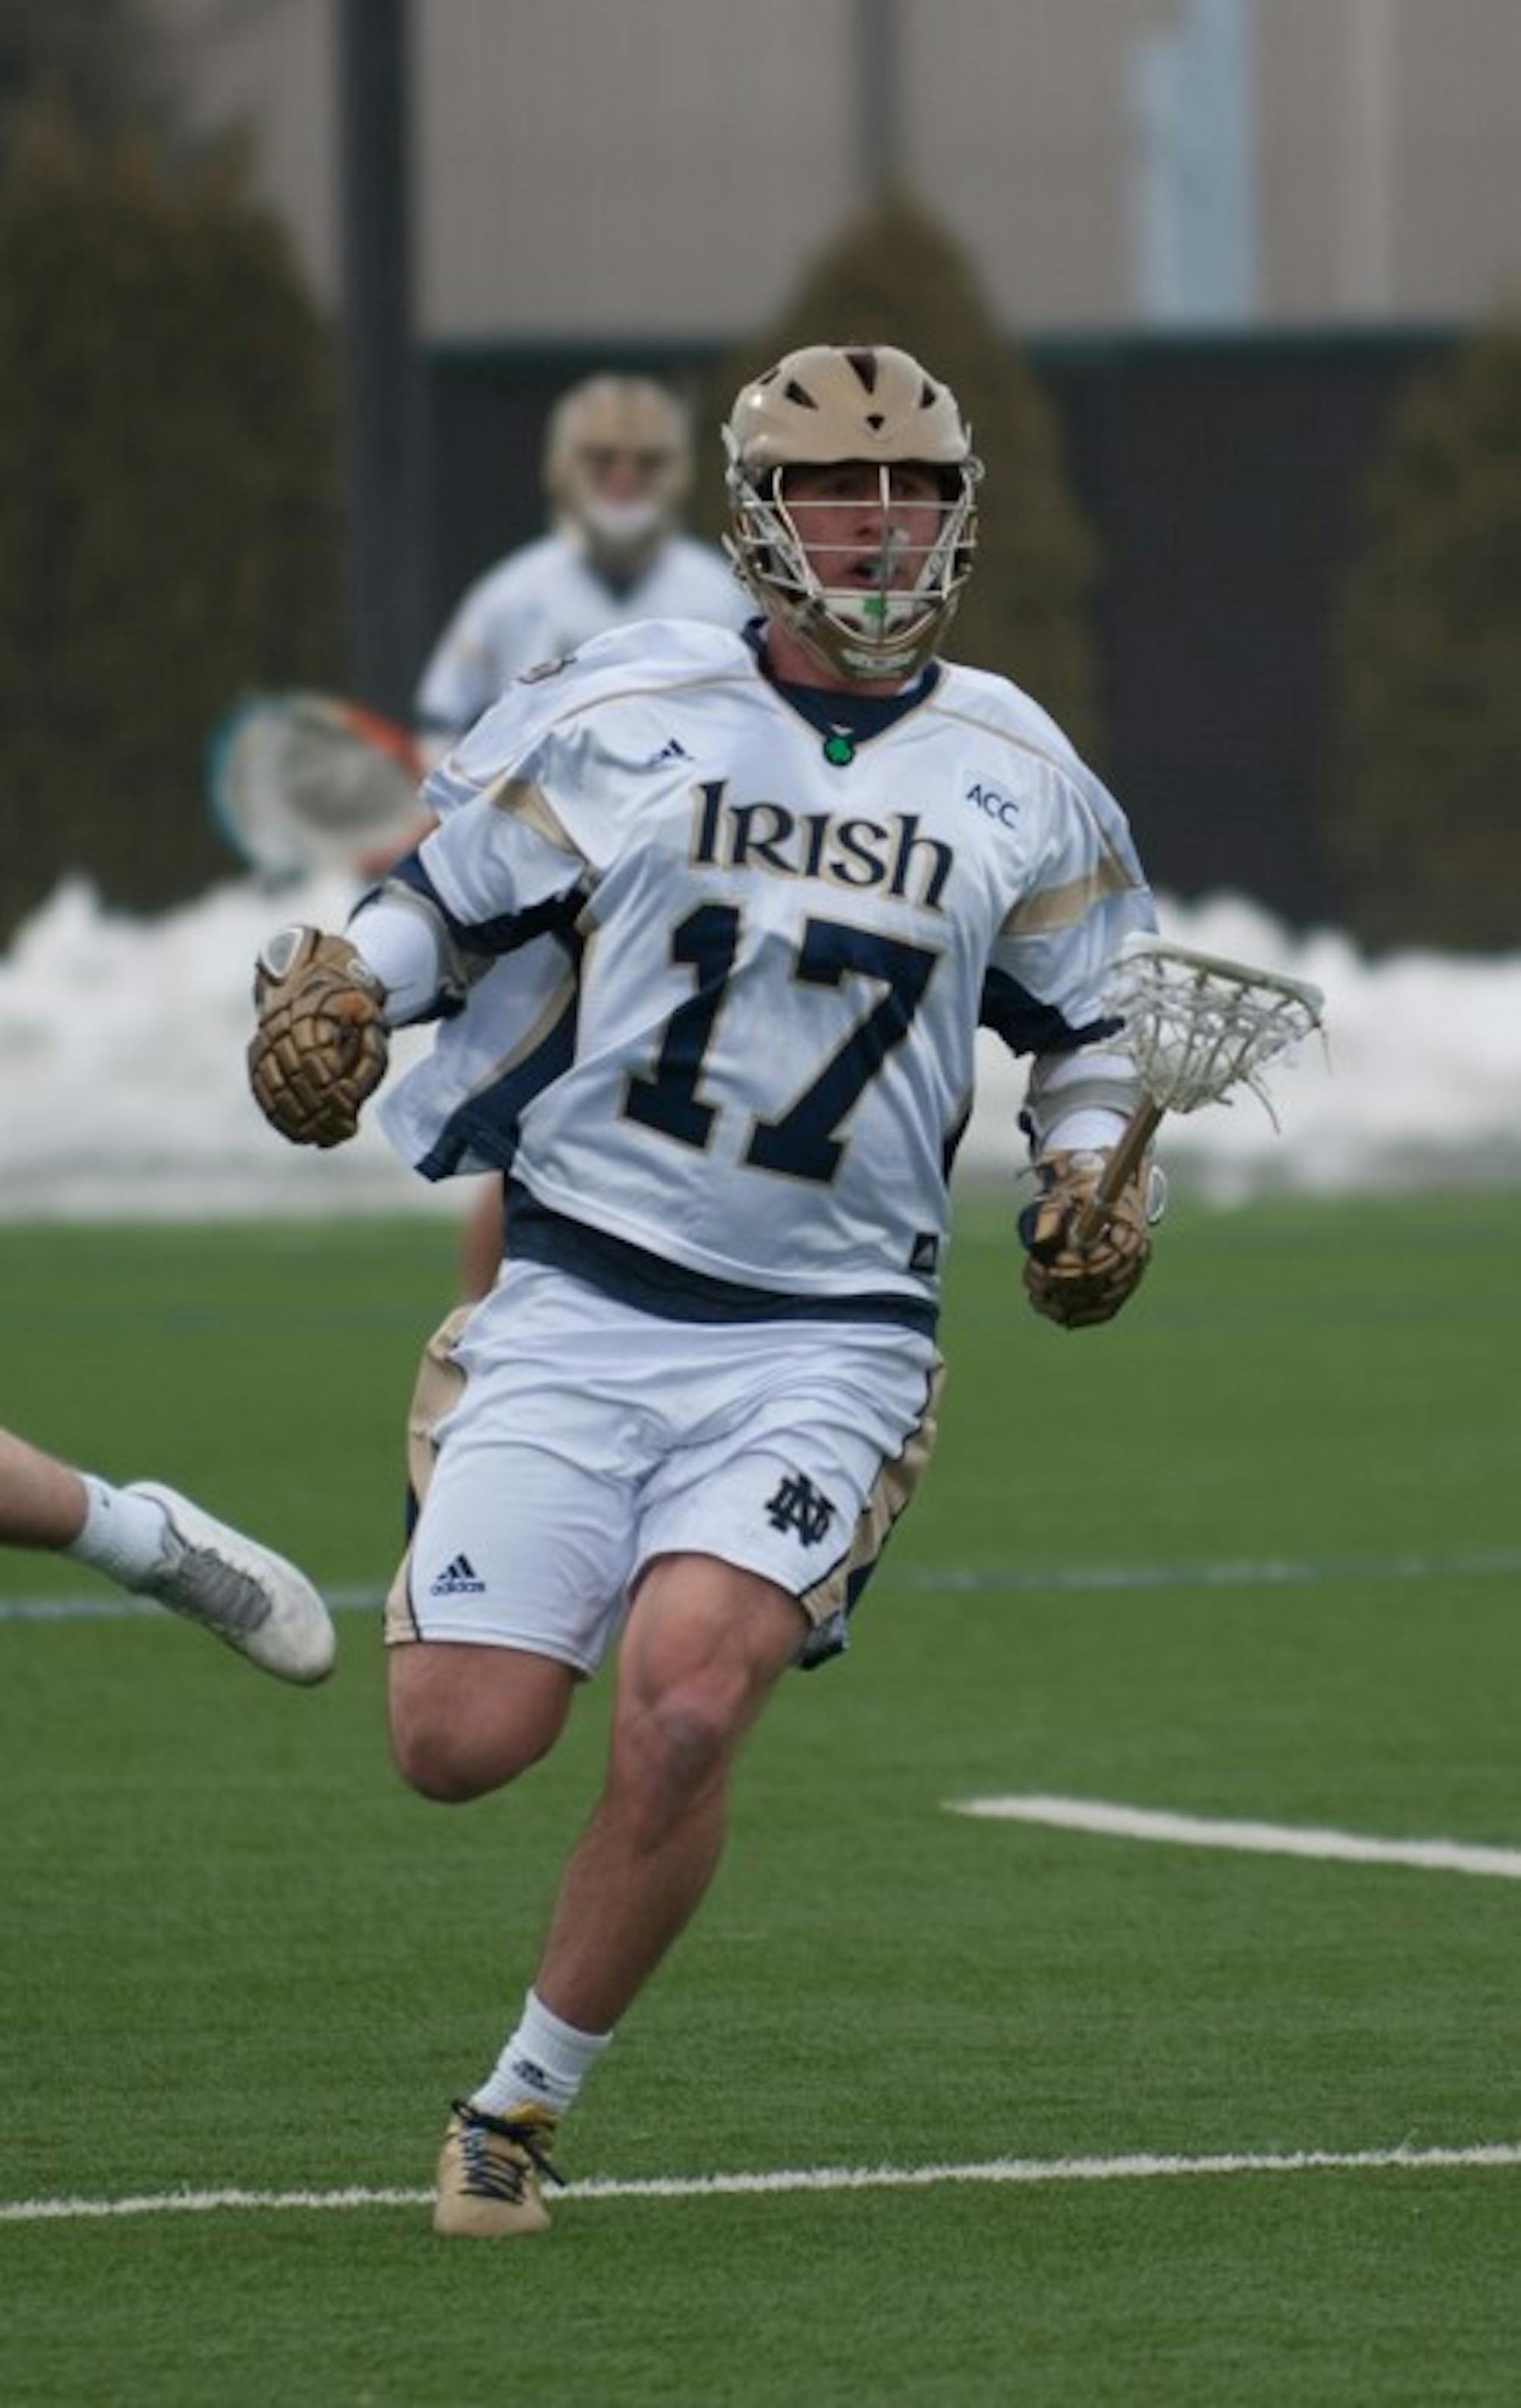 Irish junior midfielder Will Corrigan races down the field during Notre Dame's 8-7 loss to Penn State on Feb. 22.